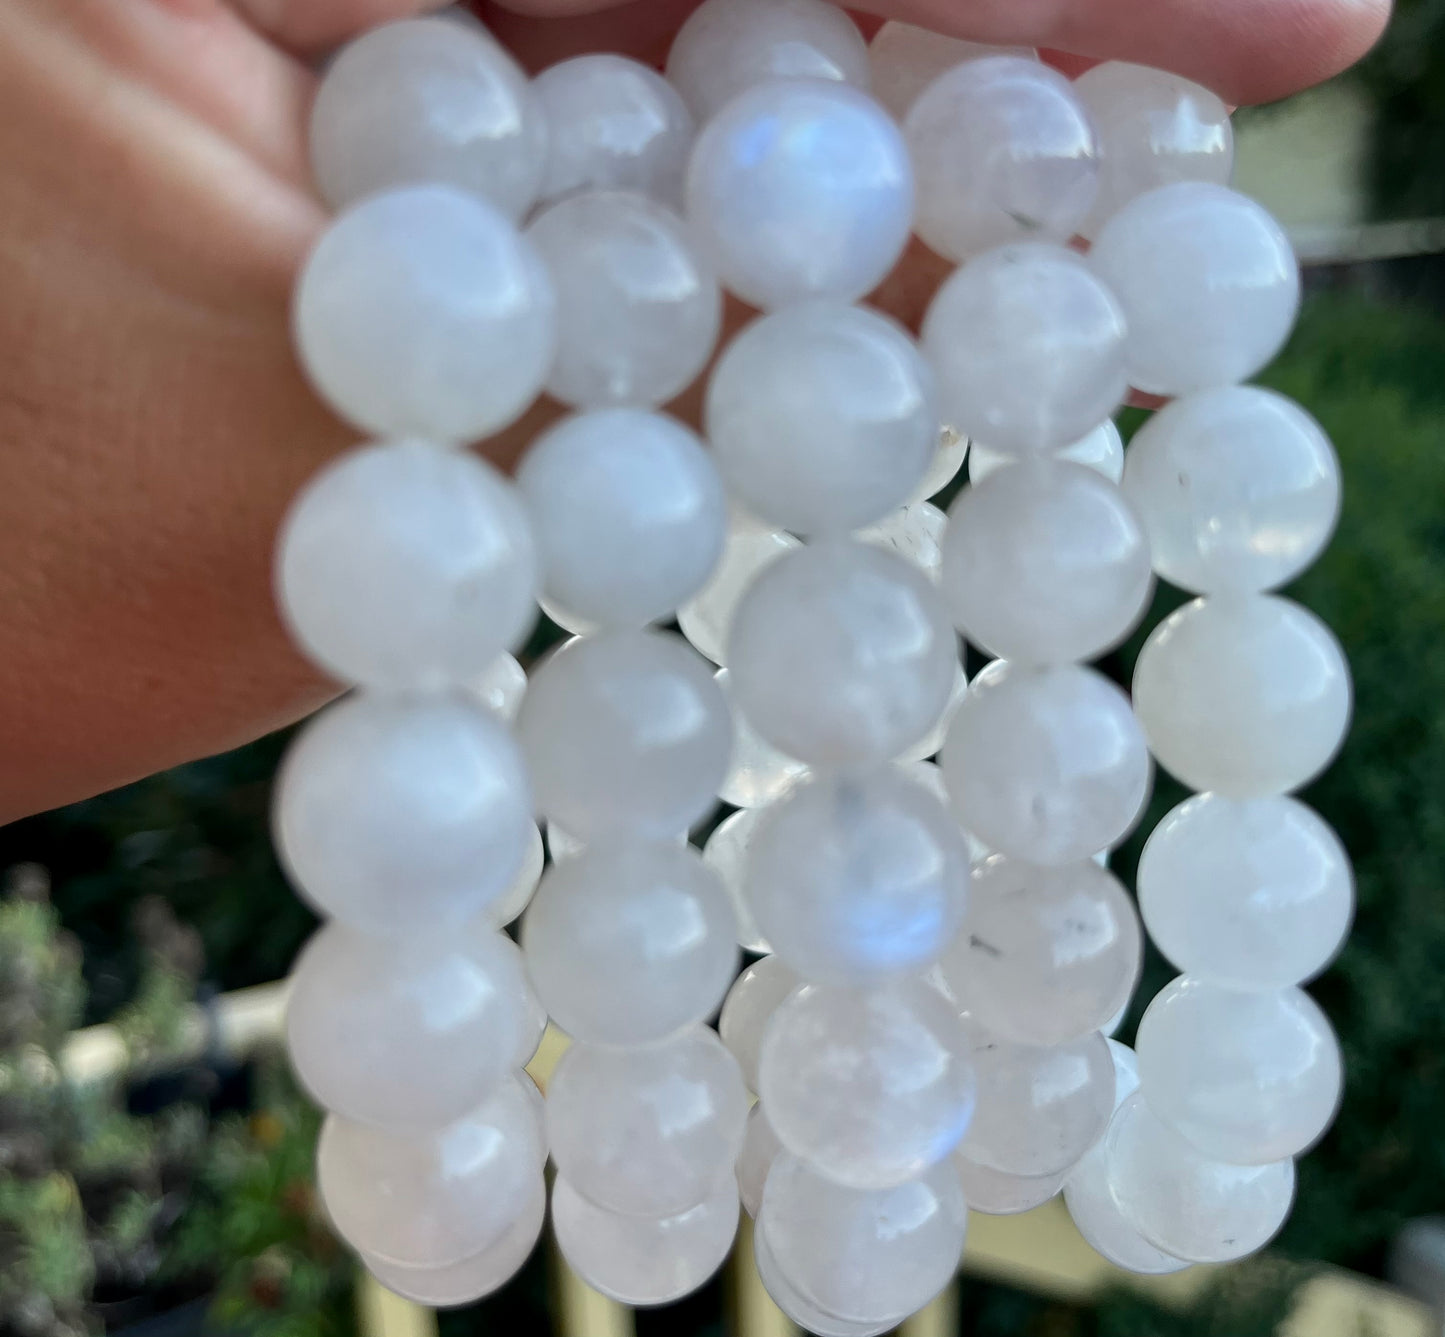 Real Moonstone 13mm , Many Blue Flashes